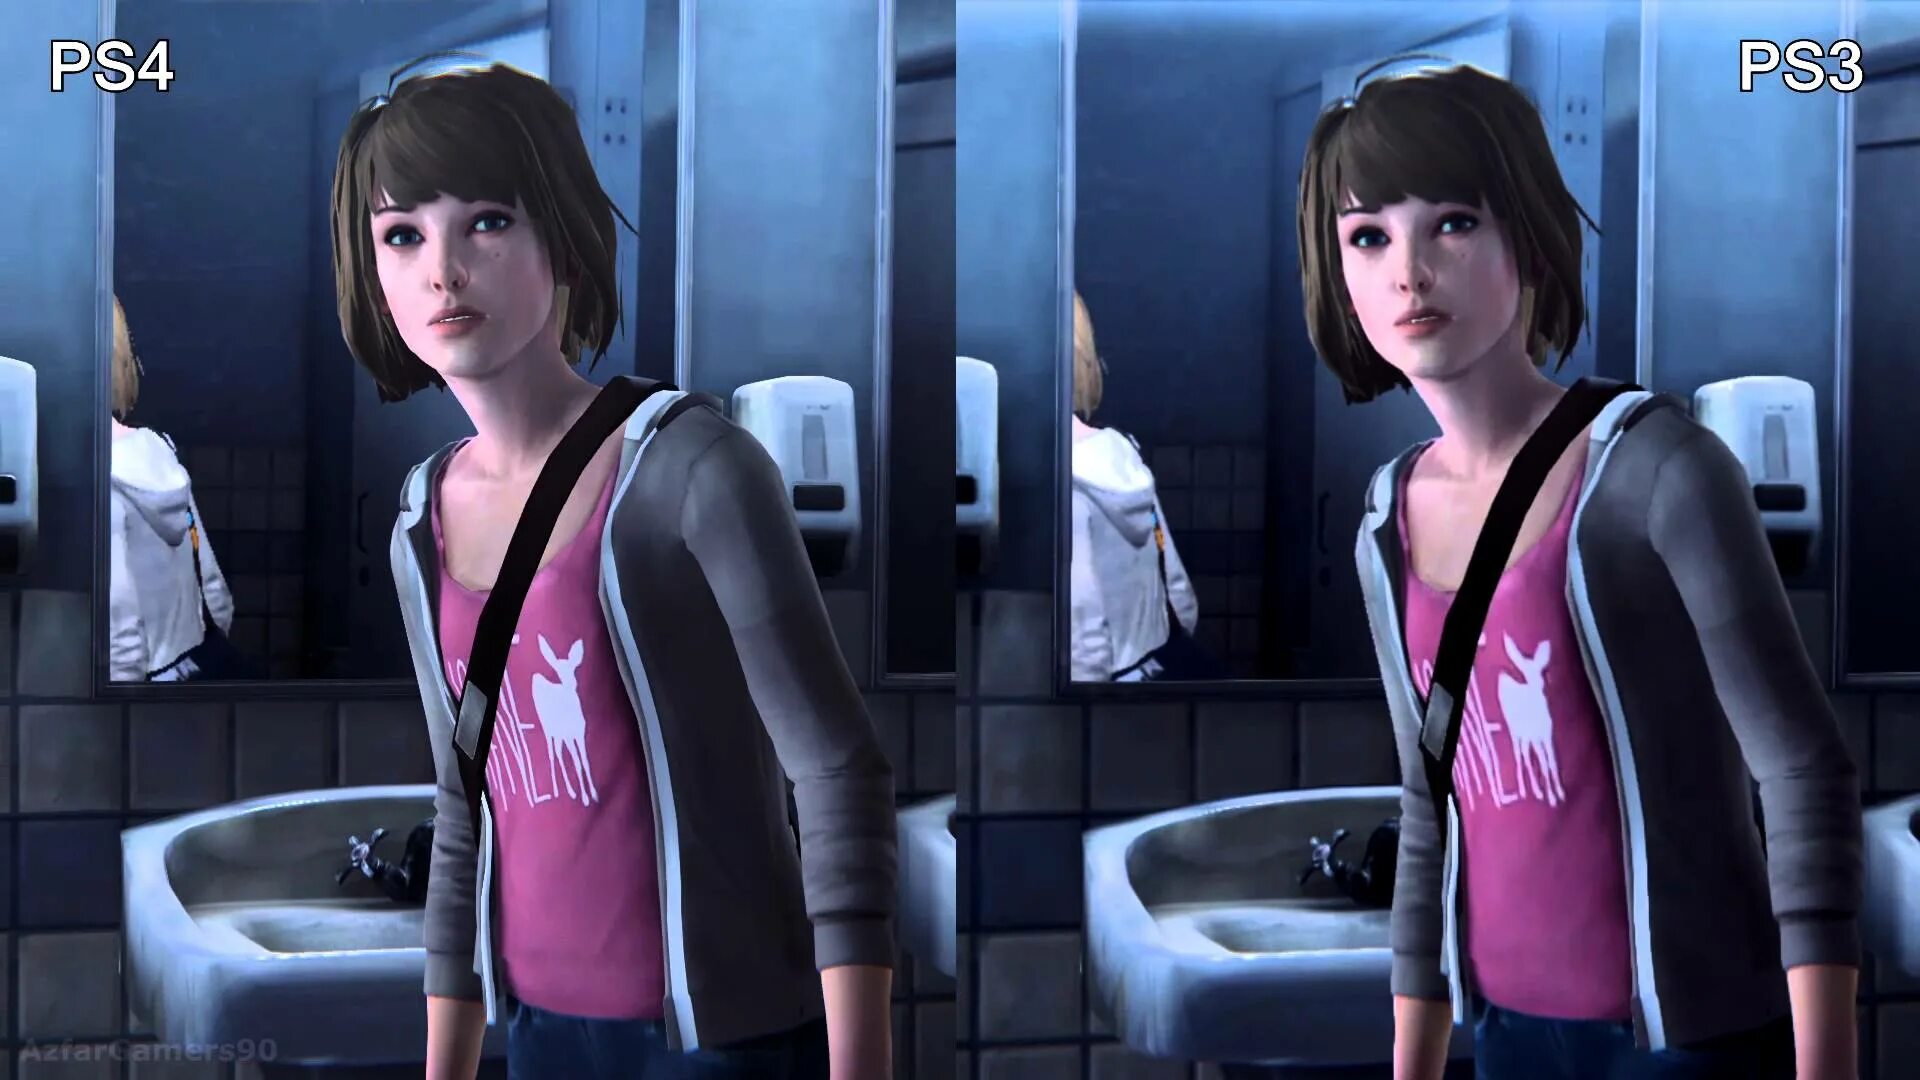 Life is warmed. Life is Strange ps4. Life is Strange 3. Life is Strange PLAYSTATION 3. Life is Strange 2 (ps4).